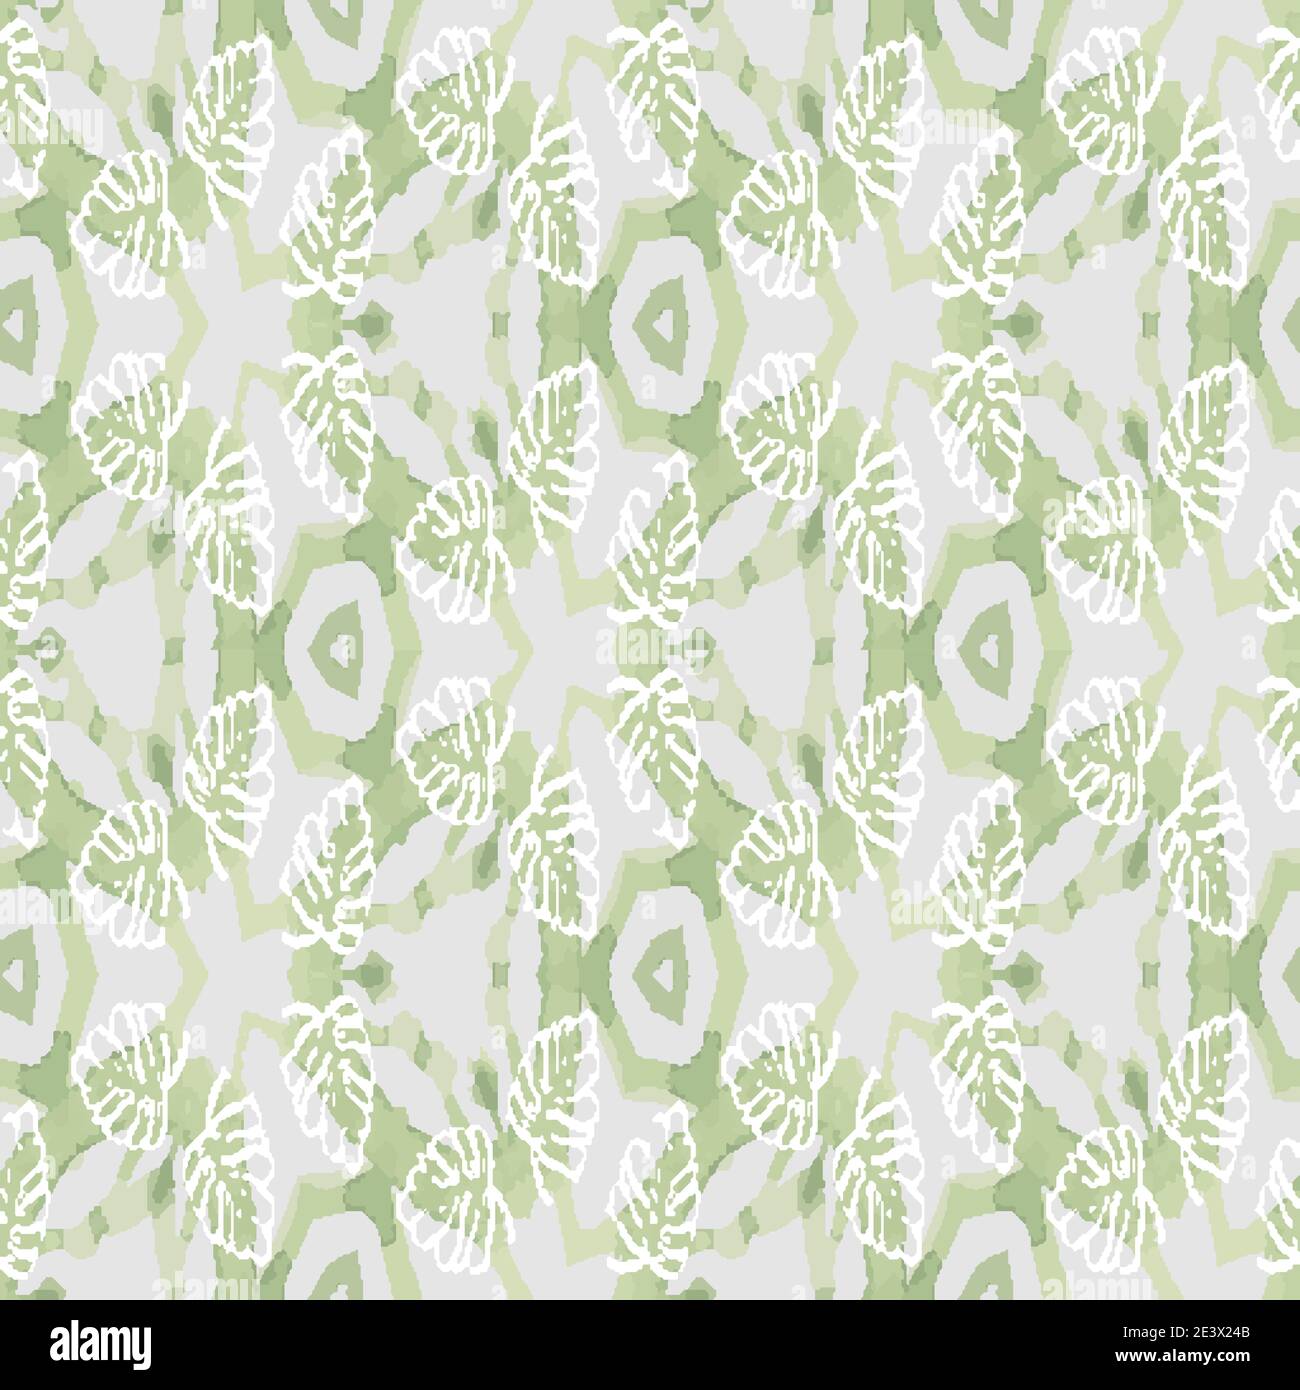 green lacy seamless vector pattern with leaves Stock Vector